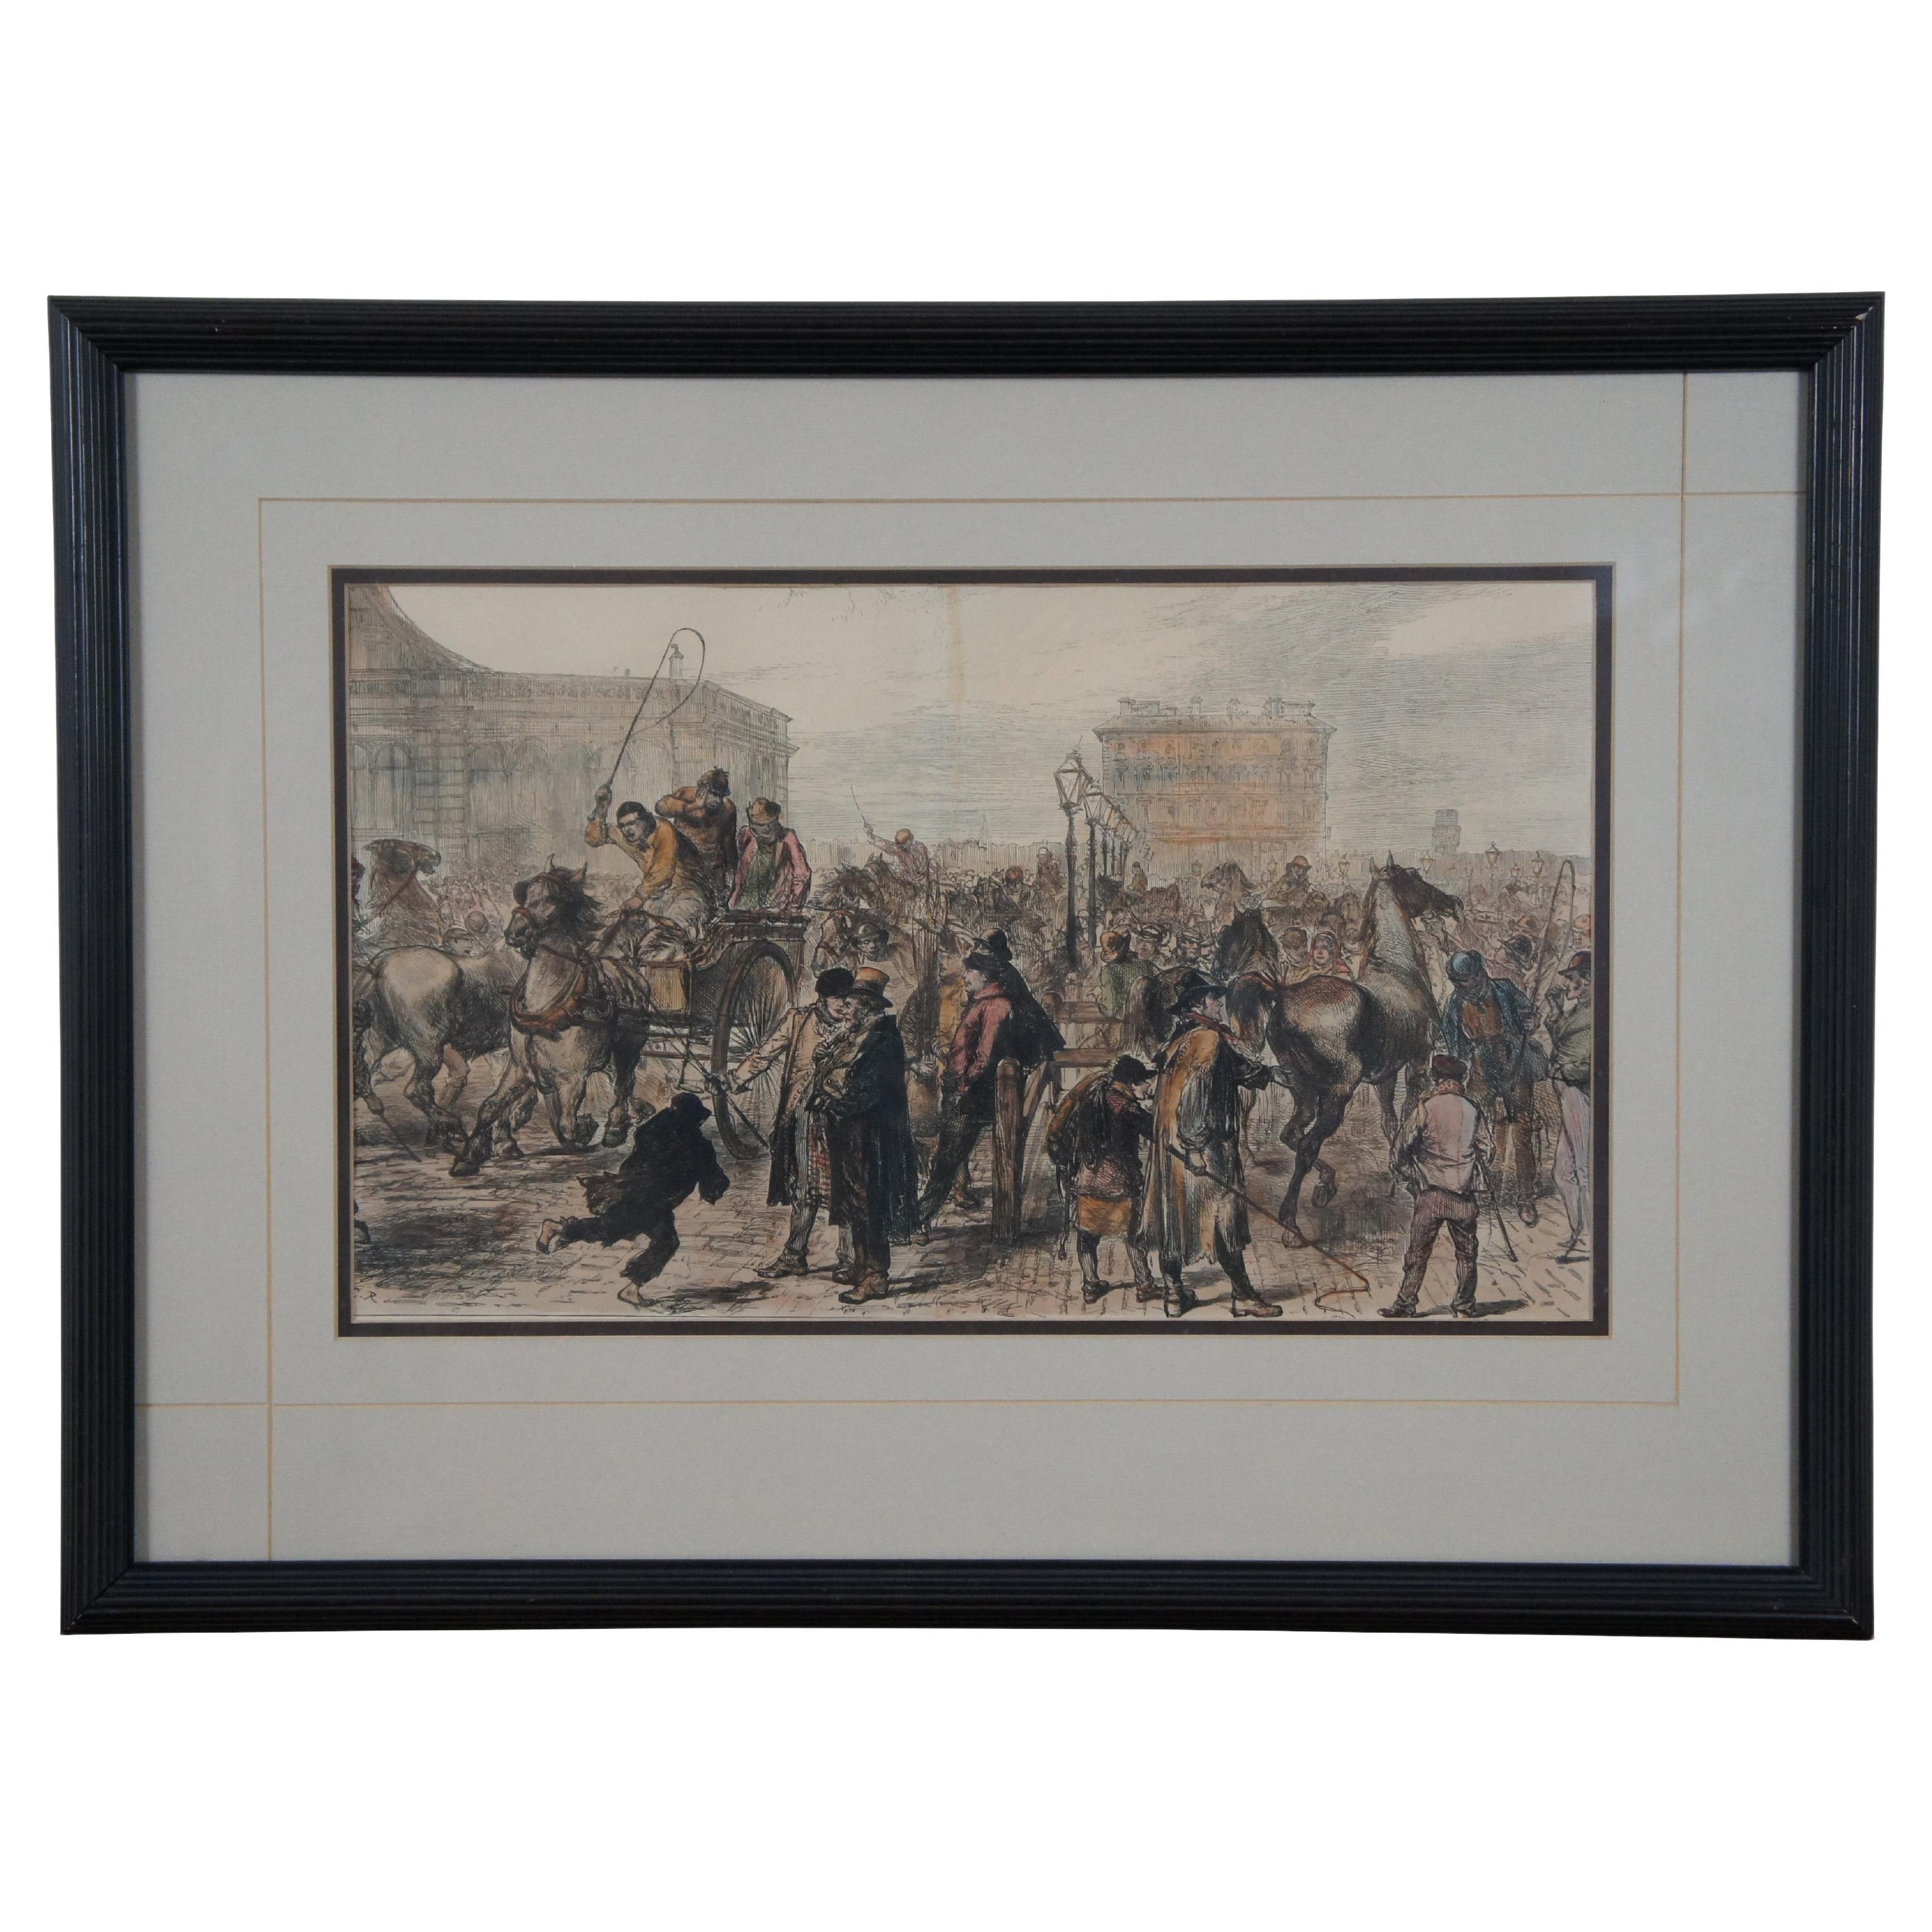 1870s Antique Hand Colored Woodcut Engraving Horse Market at Islington Framed